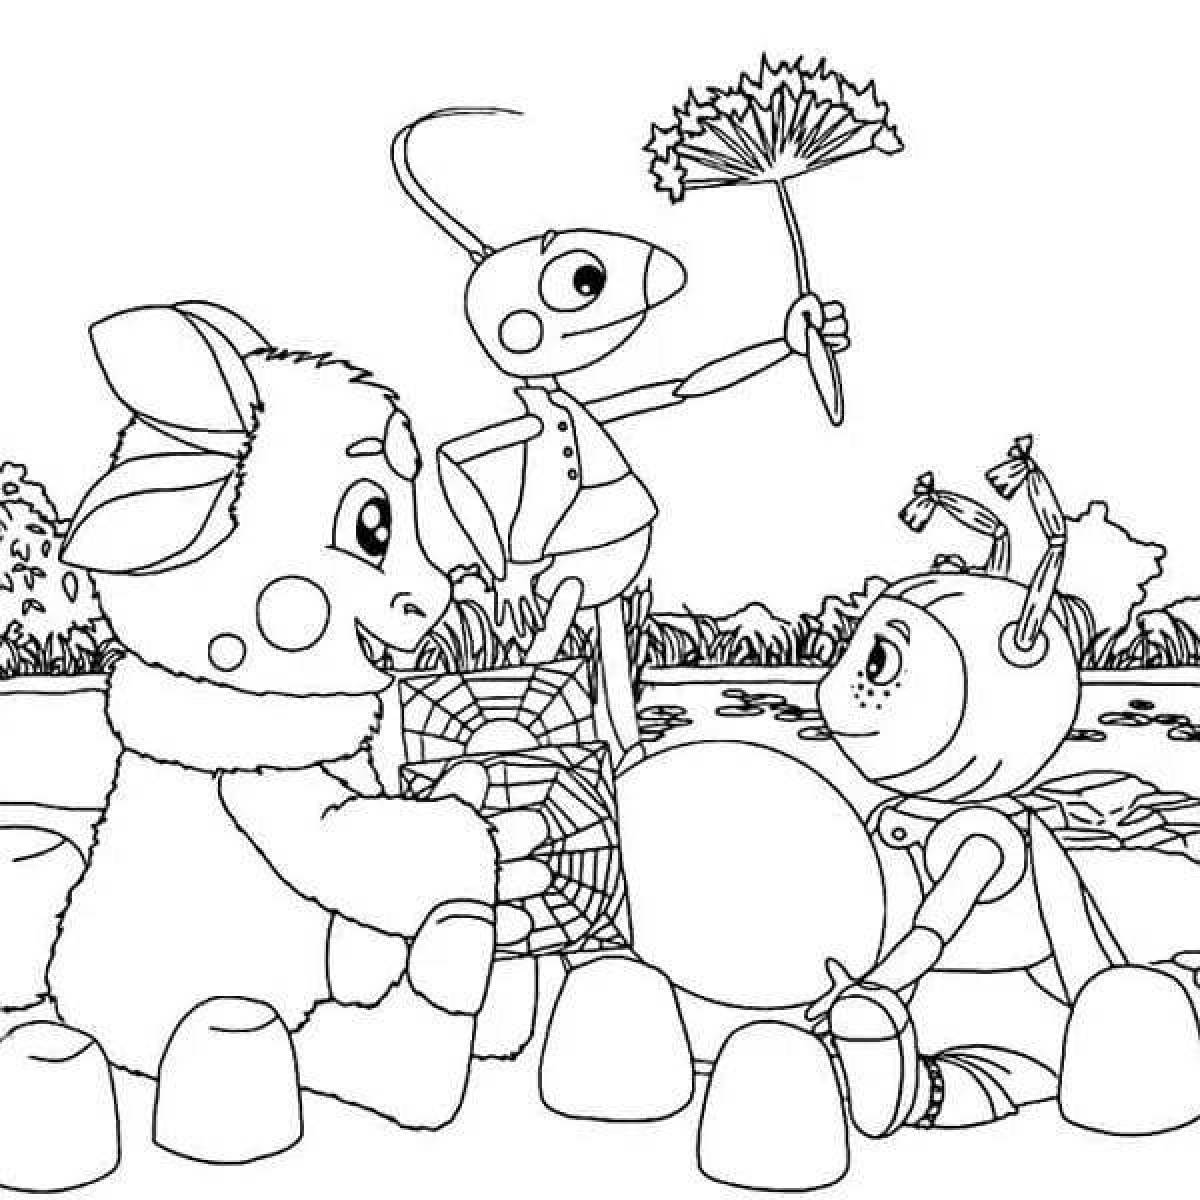 Relaxing coloring book learning with Luntik